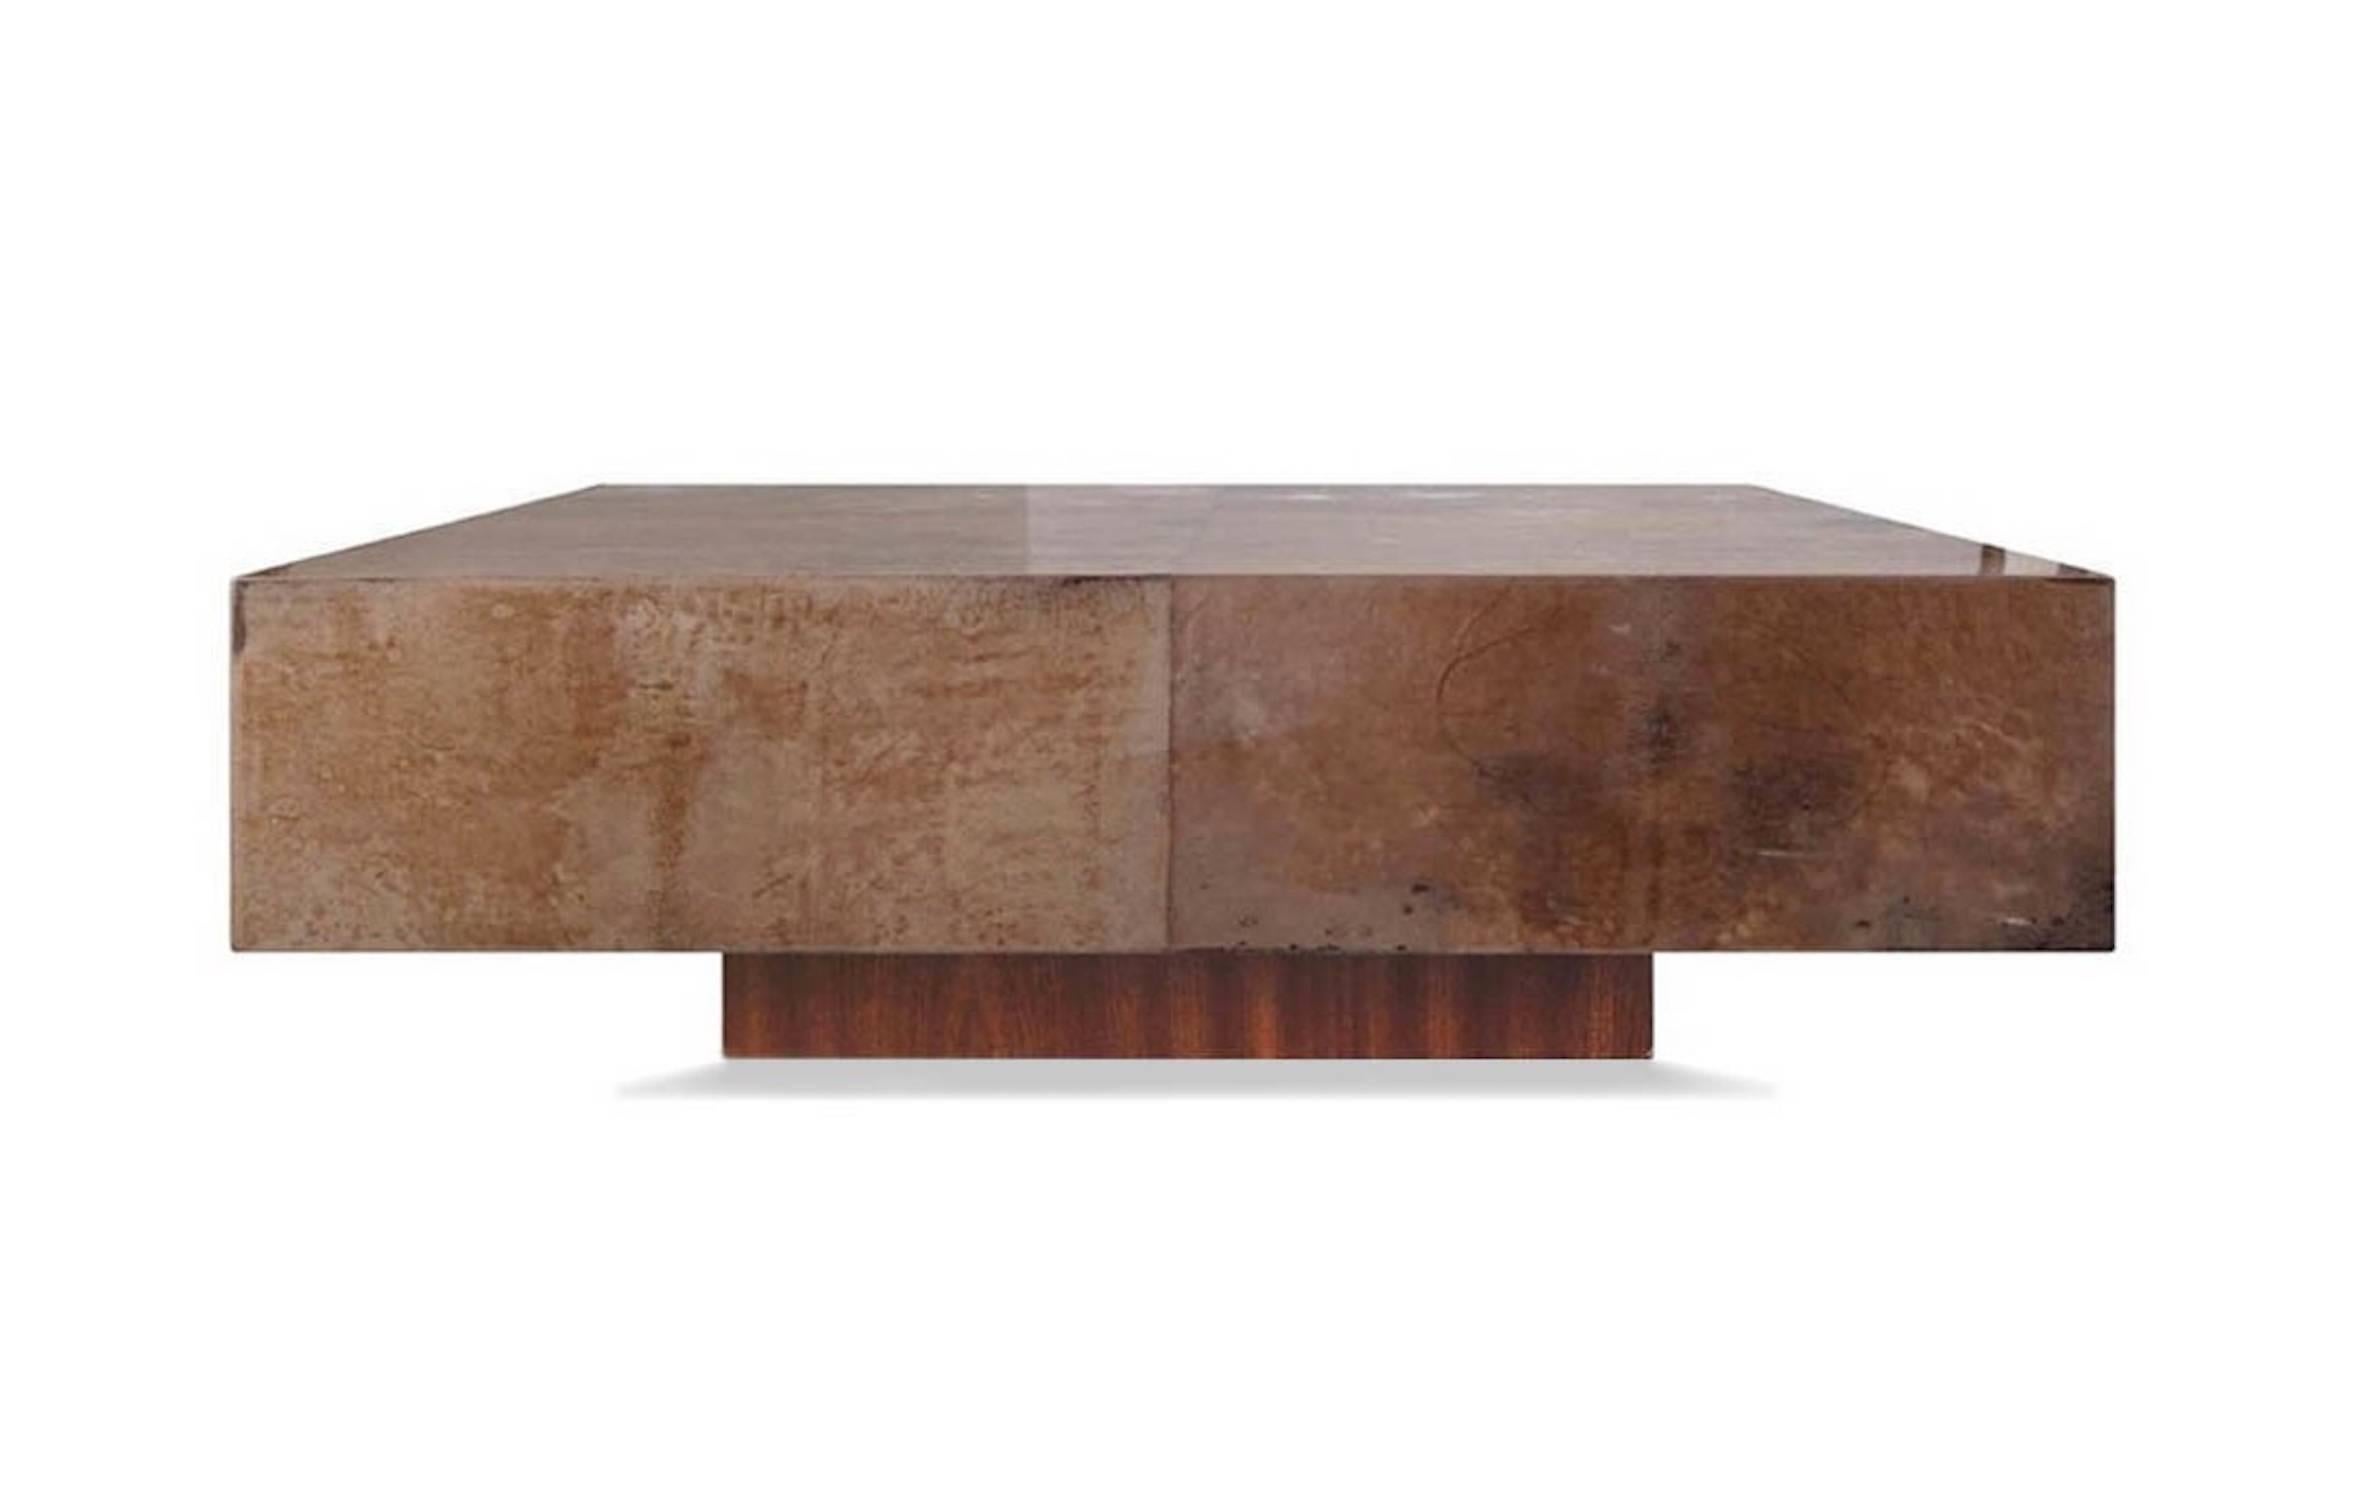 Coffee table in goatskin leather color light tan, tie dye effect, rich of warm shades that go from beige to brown; indeed a very artistic craftmanship of leather dyeing.
The top is a parallelepiped in parchment goatskin, polished lacquer high gloss